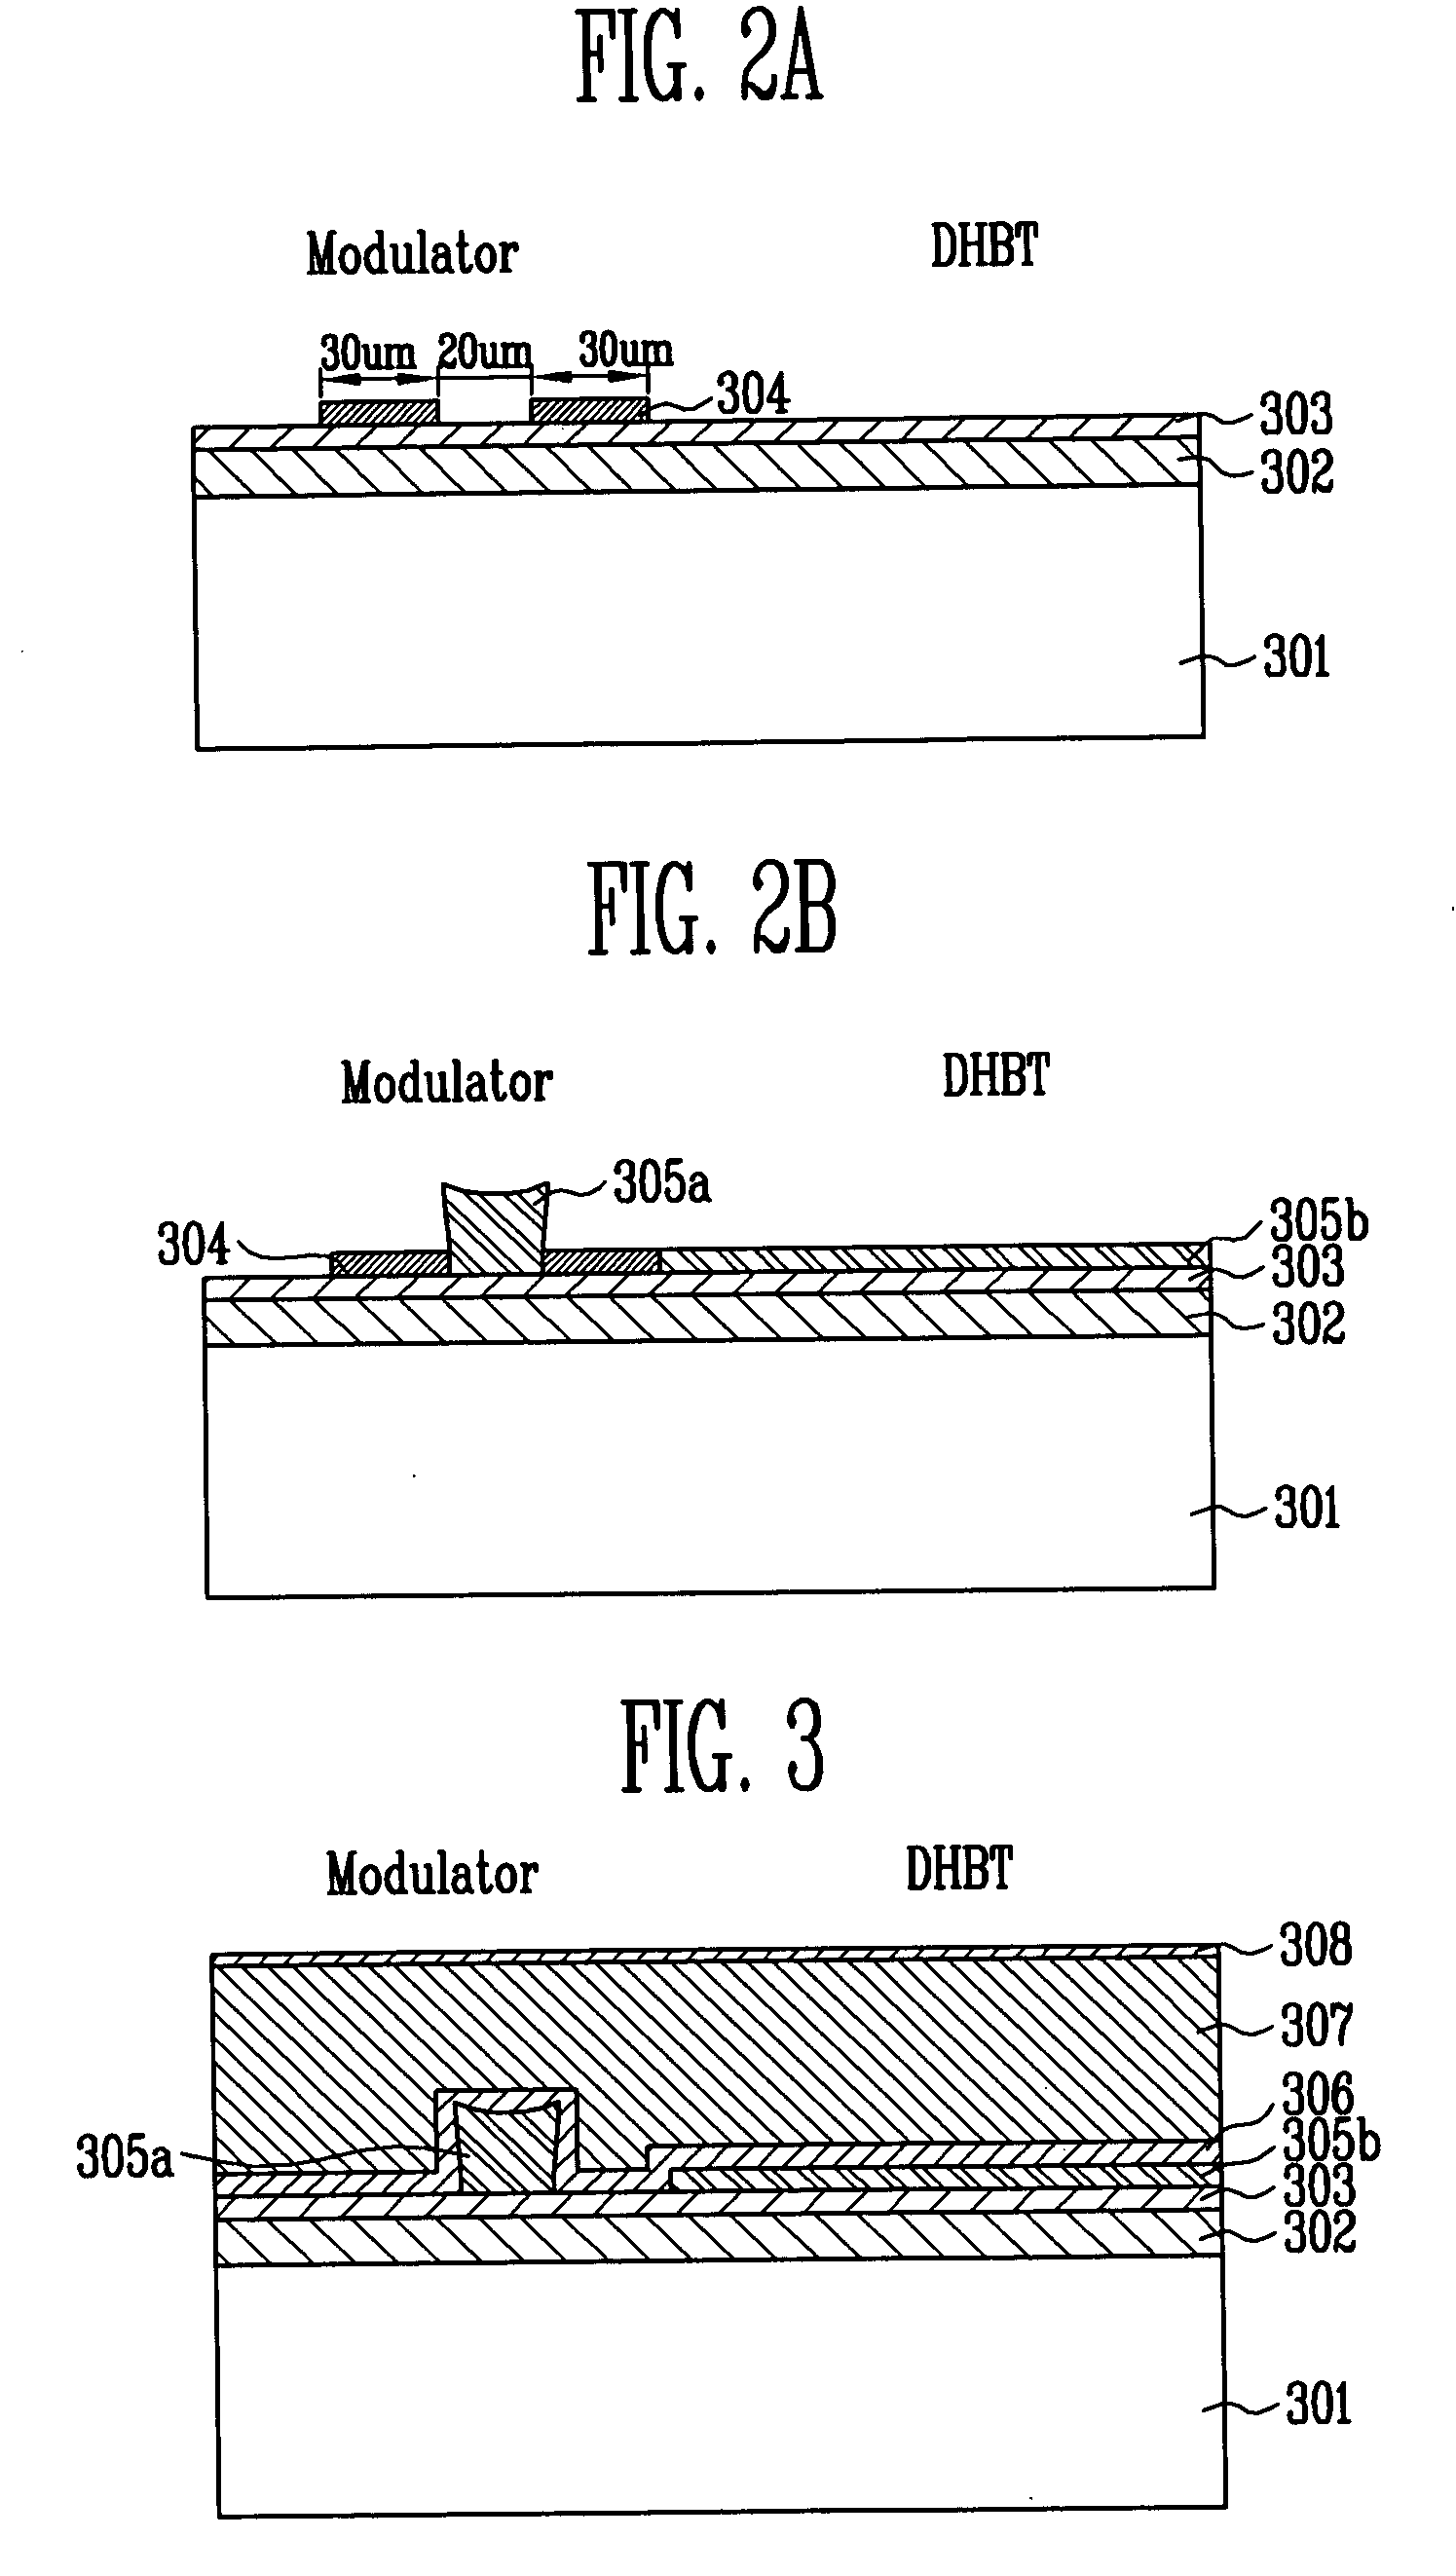 Optoelectronic transmitter integrated circuit and method of fabricating the same using selective growth process